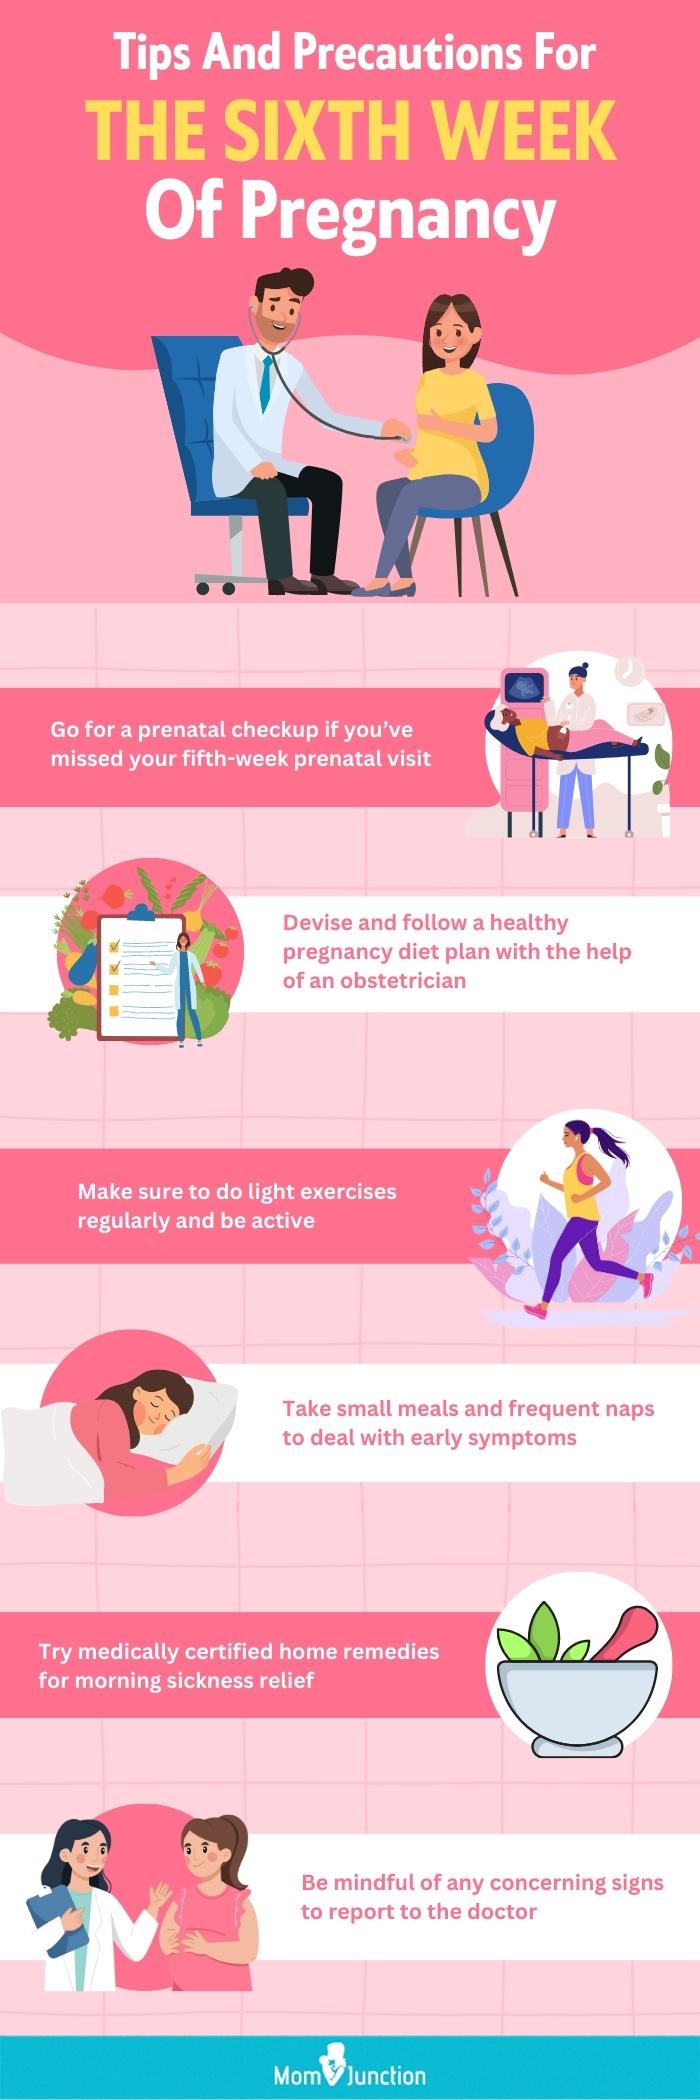 tips and precautions for the sixth week of pregnancy (infographic)